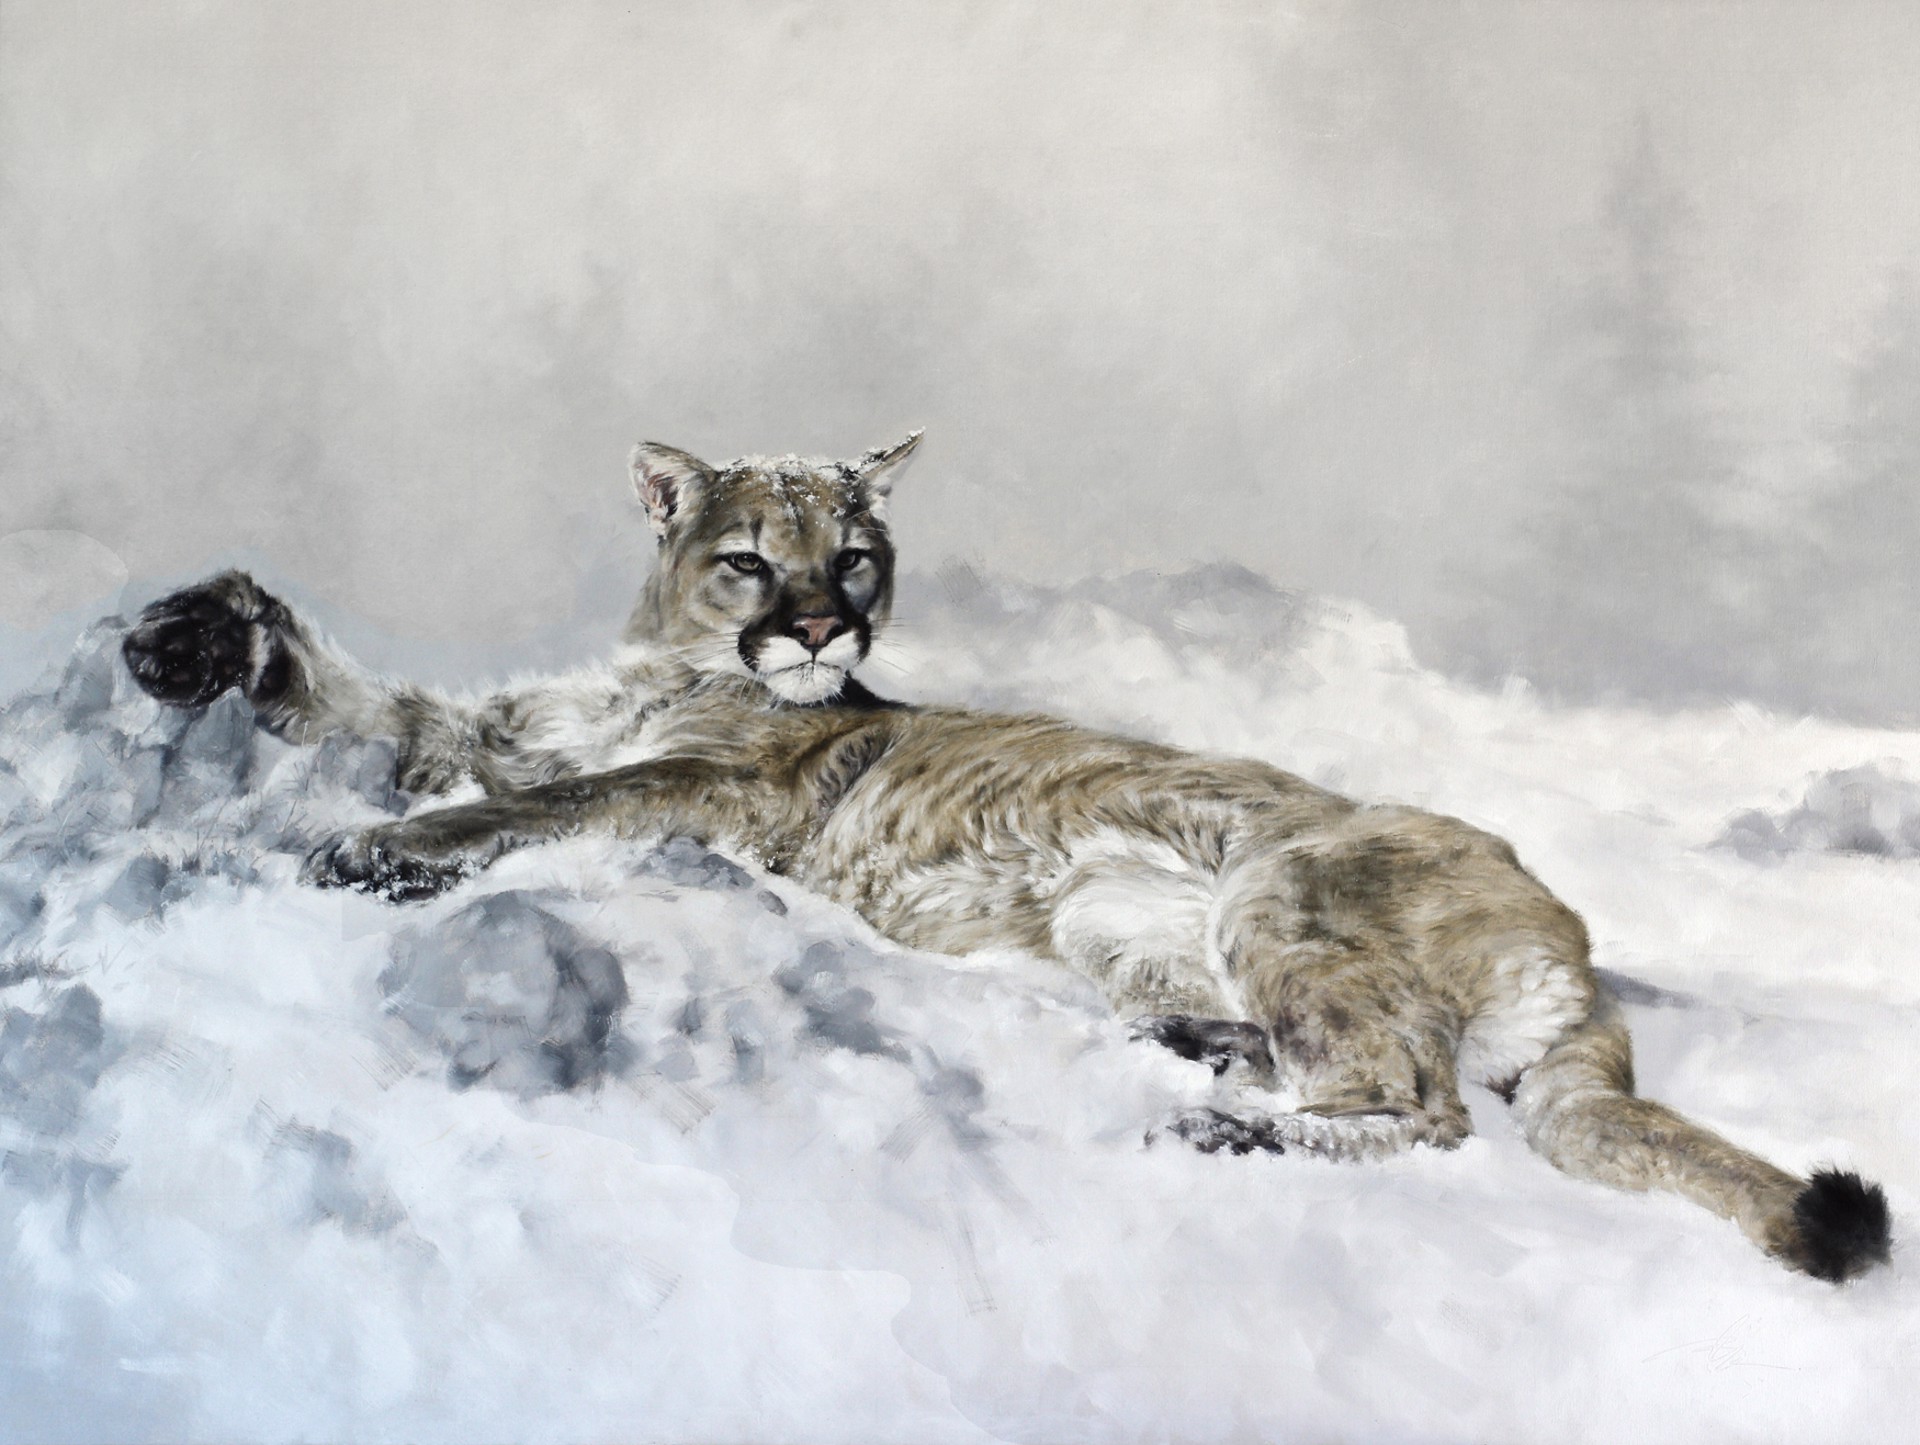 An Original Oil Painting Of A Mountain Lion Laying Down Lifting Its Head To Look With A Faded Misty Forest Behind, By Doyle Hostetler